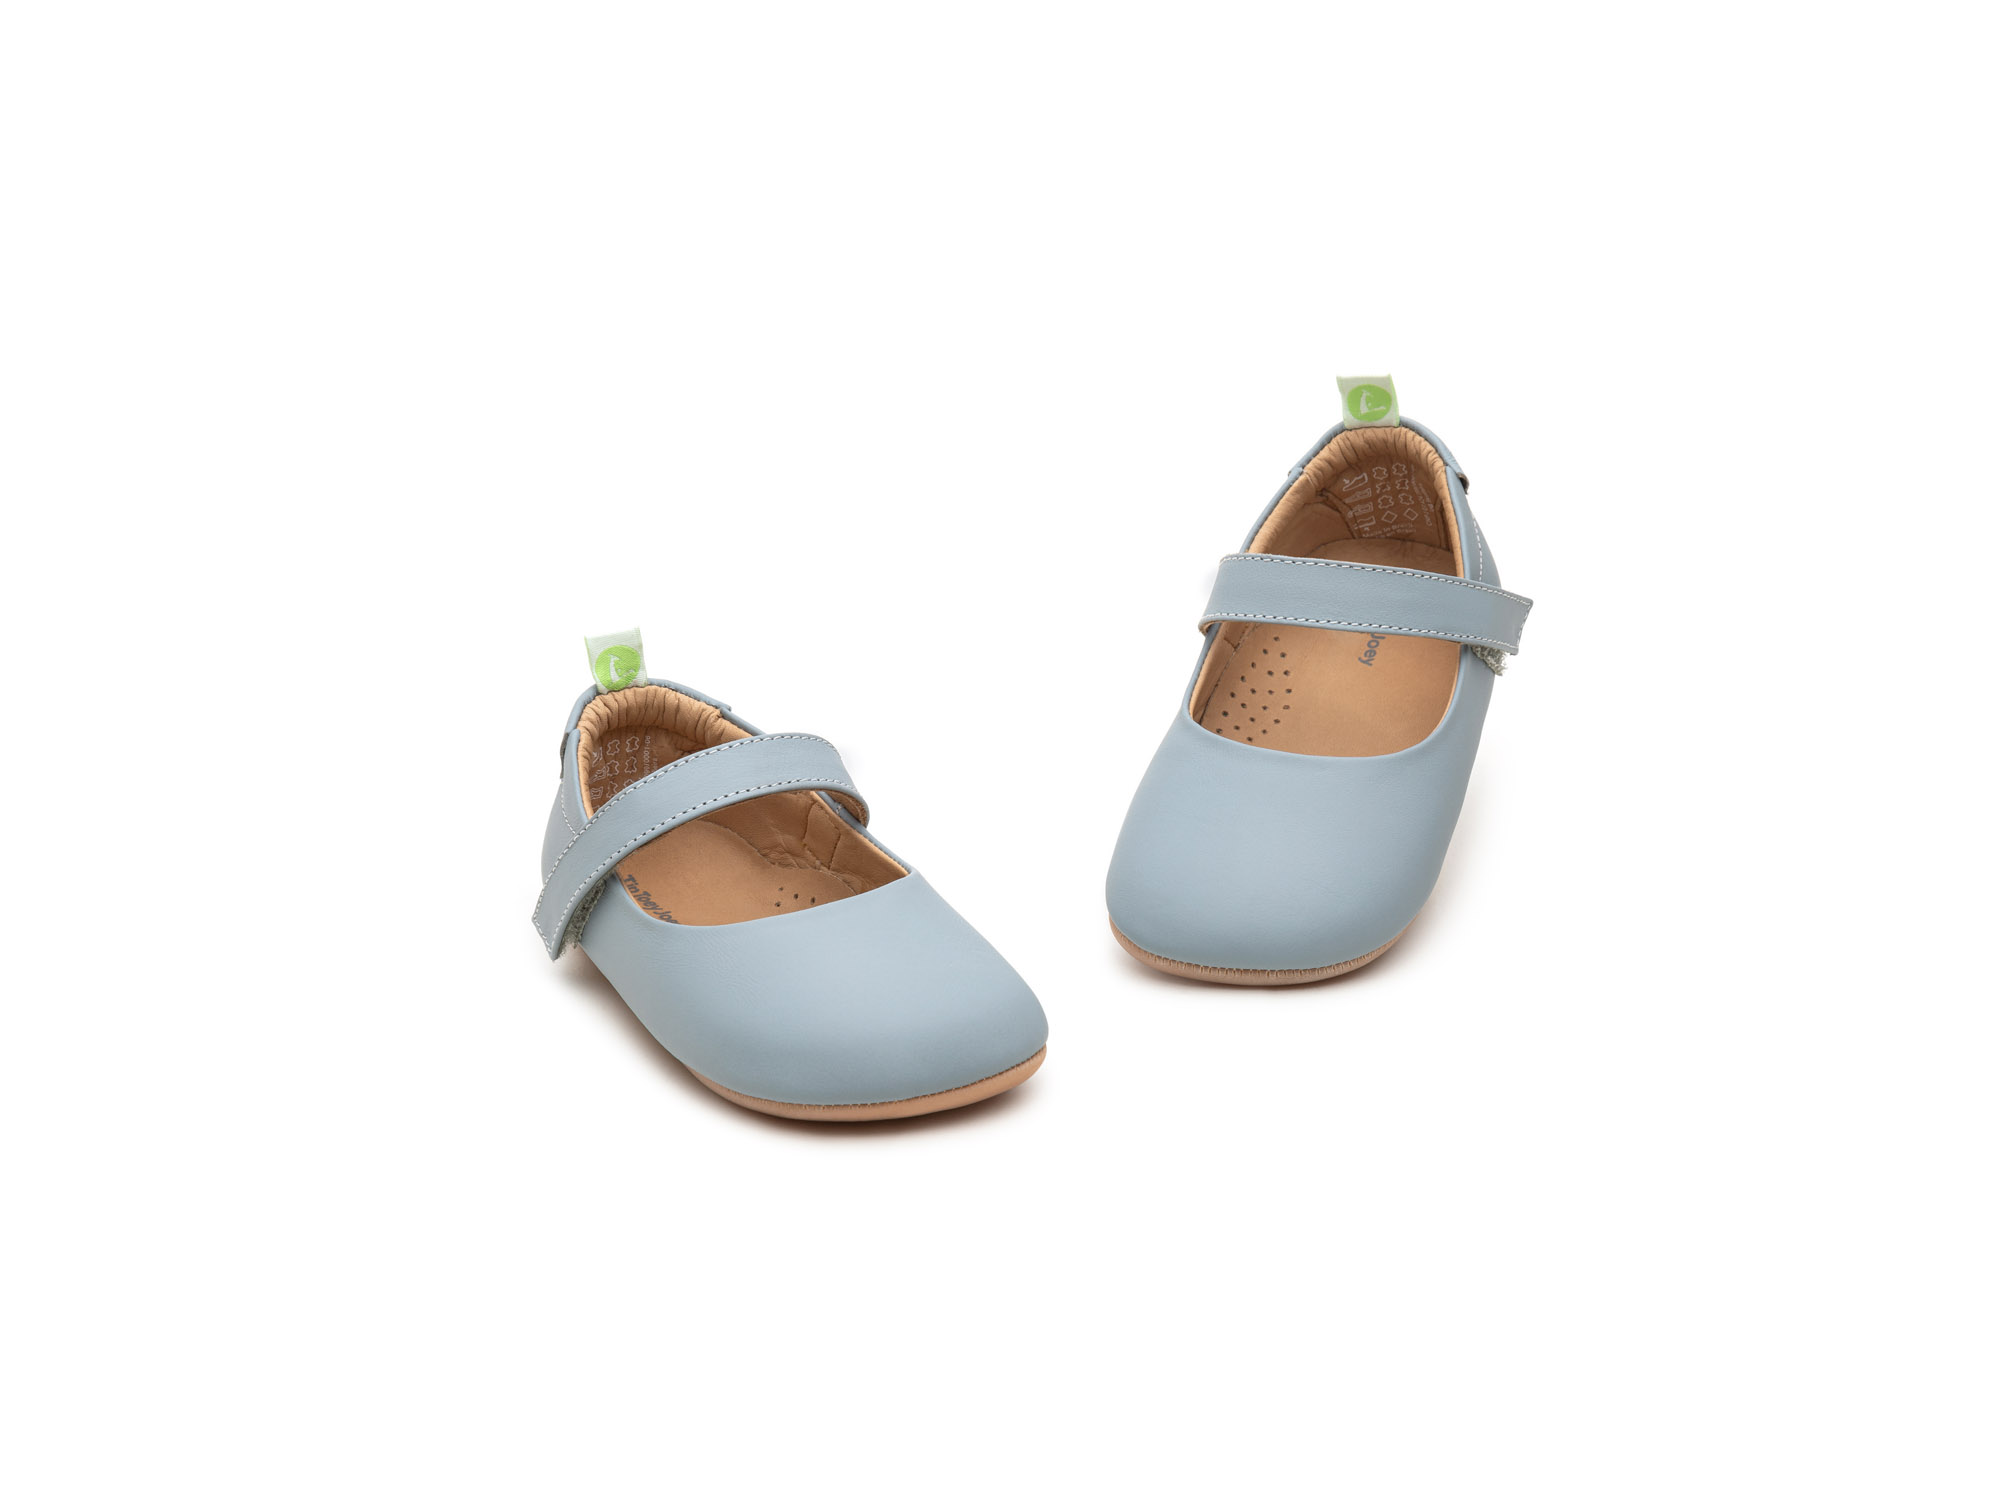 UP & GO Mary Janes for Girls Dolly | Tip Toey Joey - Australia - 3